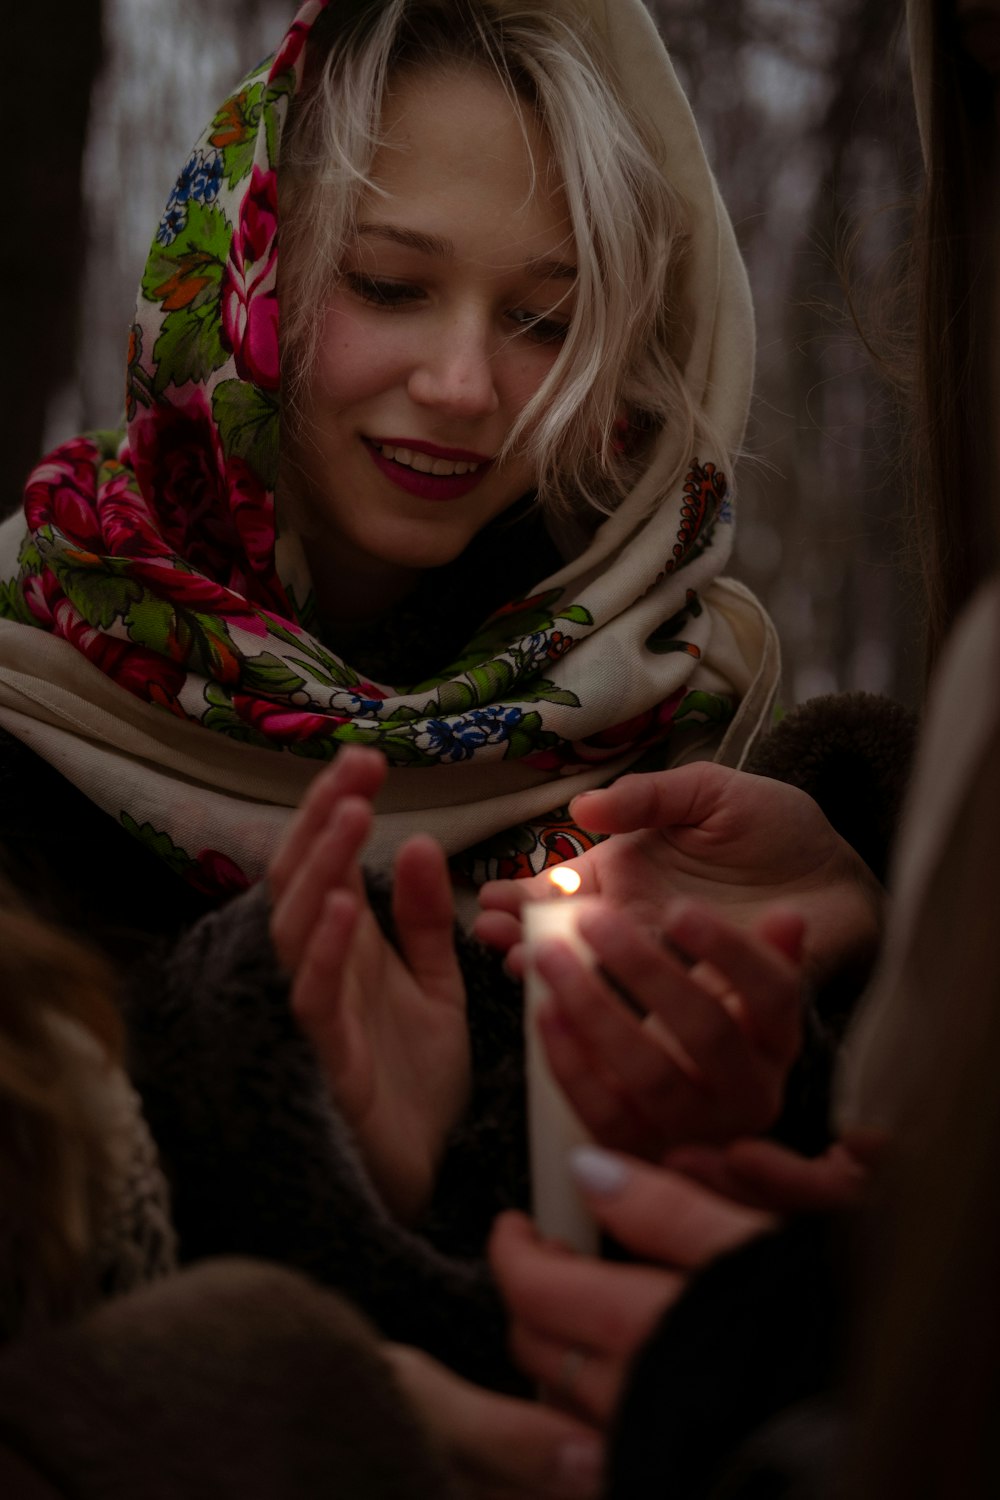 a woman holding a lit candle in her hands